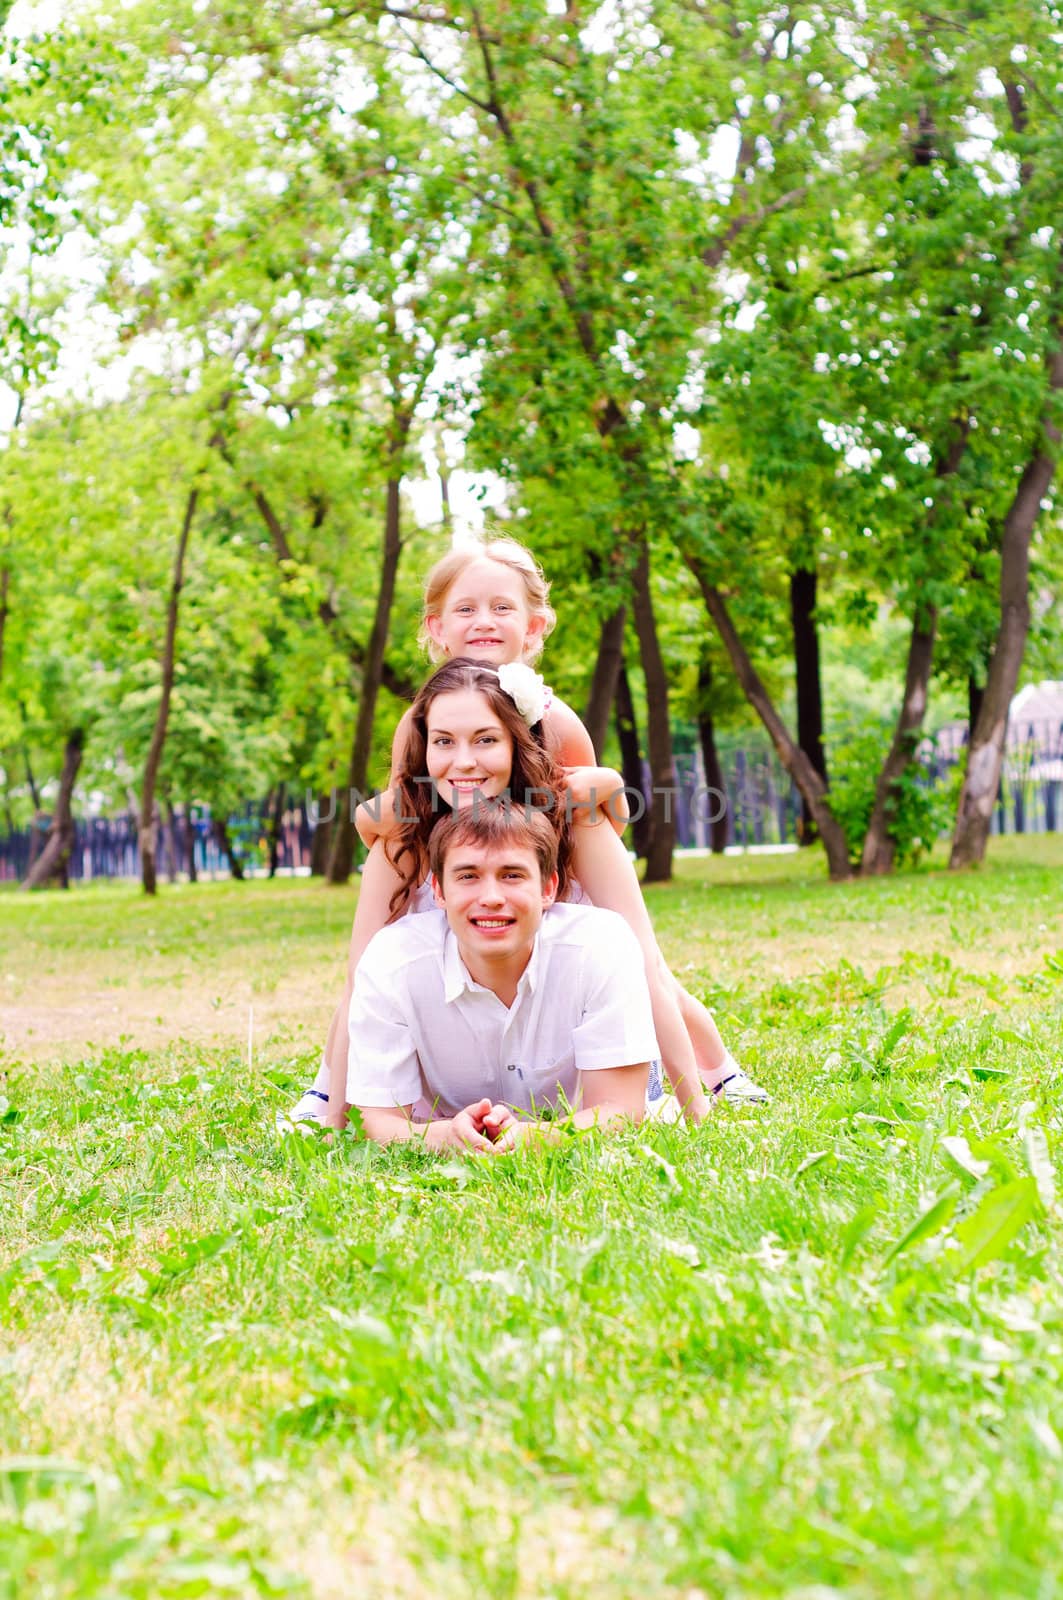 Family lying in the park, spend time with family